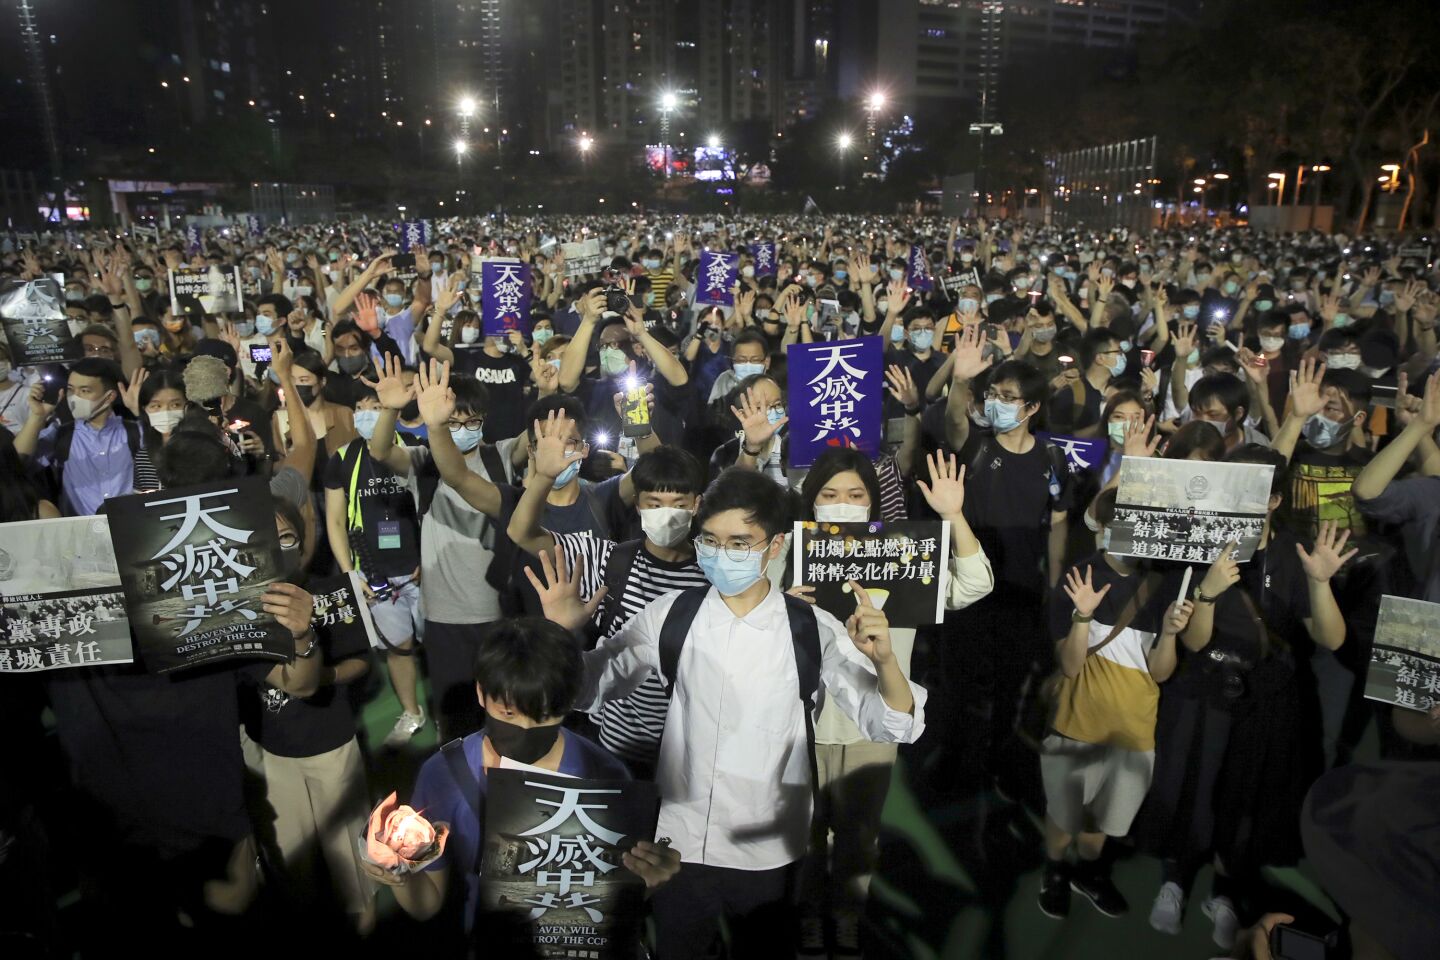 Participants gesture with five fingers, signifying the "Five demands - not one less" and posters read "Heaven will destroy the CCP" during a vigil for the victims of the 1989 Tiananmen Square Massacre at Victoria Park in Causeway Bay, Hong Kong, Thursday, June 4, 2020, despite applications for it being officially denied. China is tightening controls over dissidents while pro-democracy activists in Hong Kong and elsewhere try to mark the 31st anniversary of the crushing of the pro-democracy movement in Beijing's Tiananmen Square. (AP Photo/Kin Cheung)